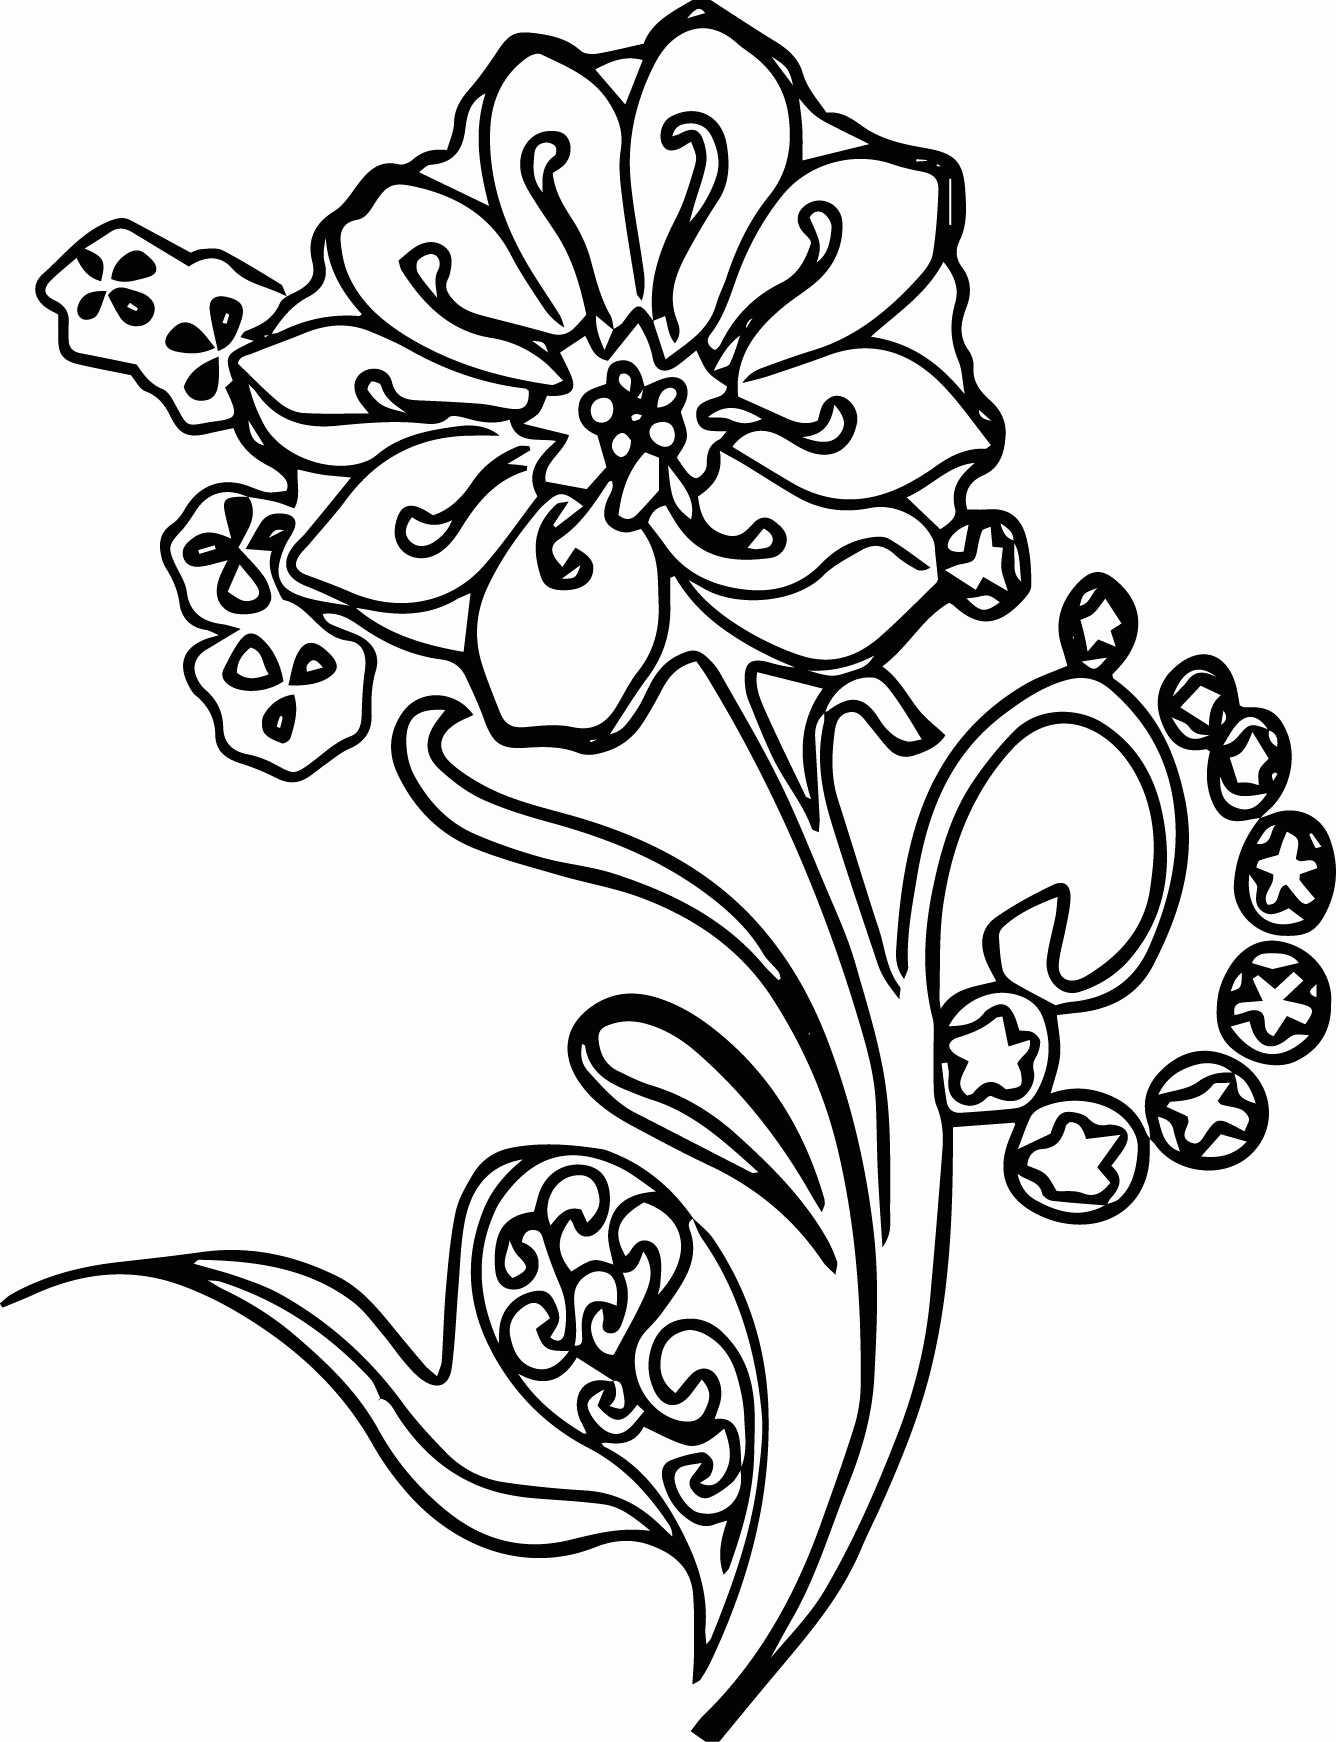 Abstract Shapes Coloring Pages - Coloring Home